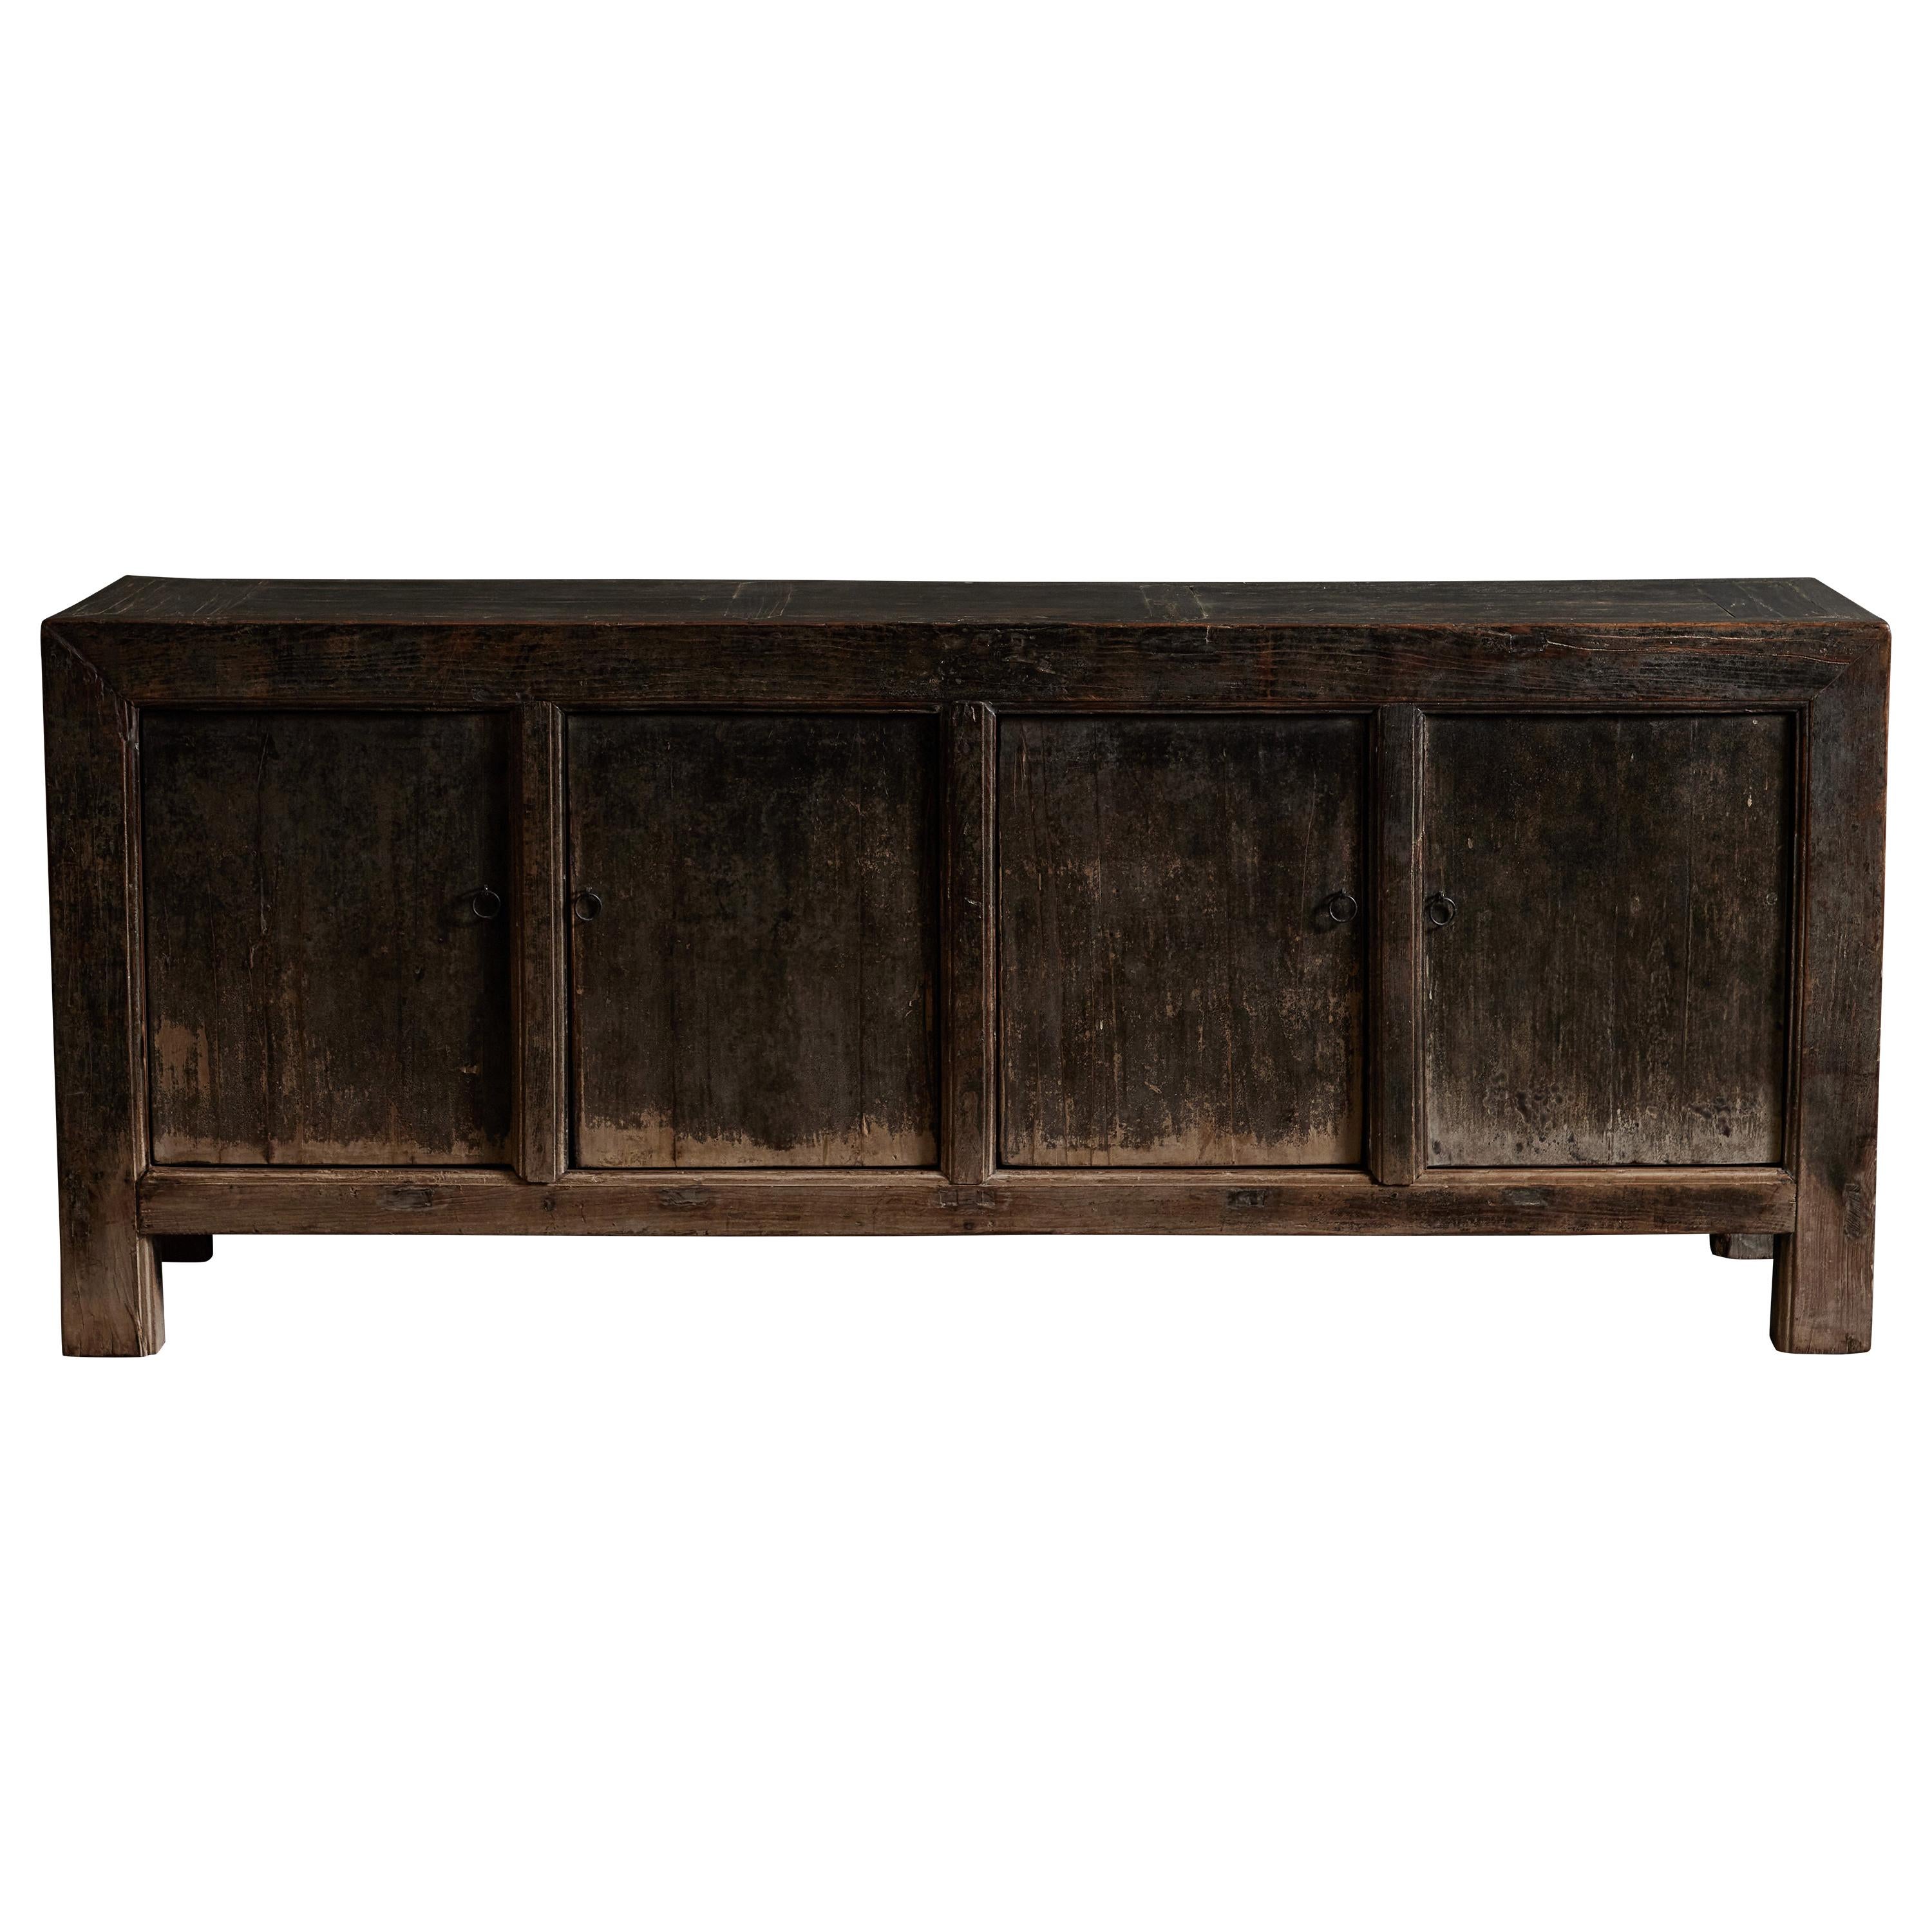 Chinese Patinated Wood Sideboard